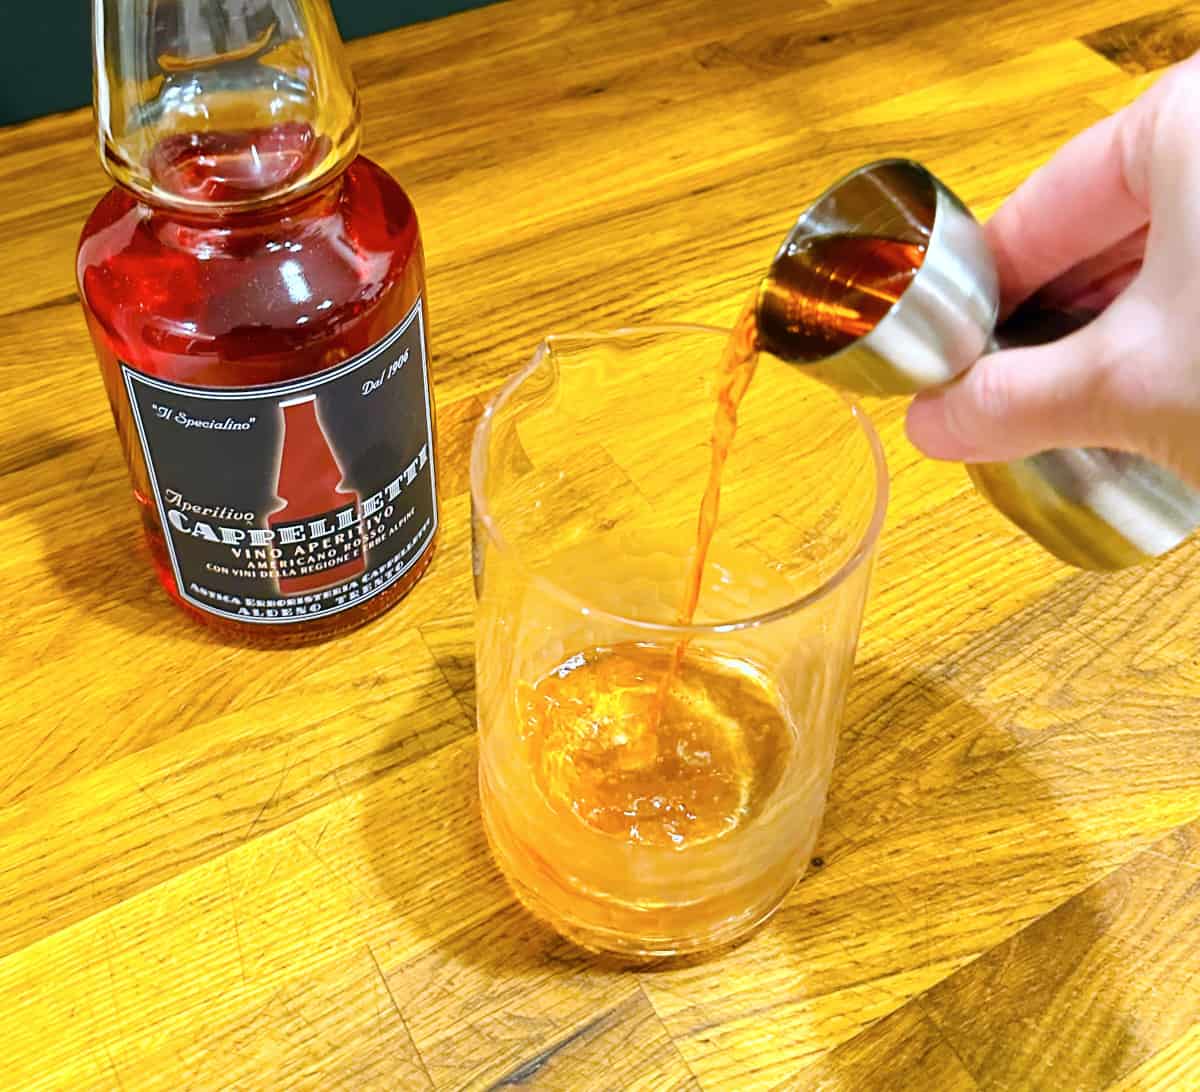 Pale red liquid being poured from a steel measuring jigger into a mixing glass next to a bottle of Cappelletti.